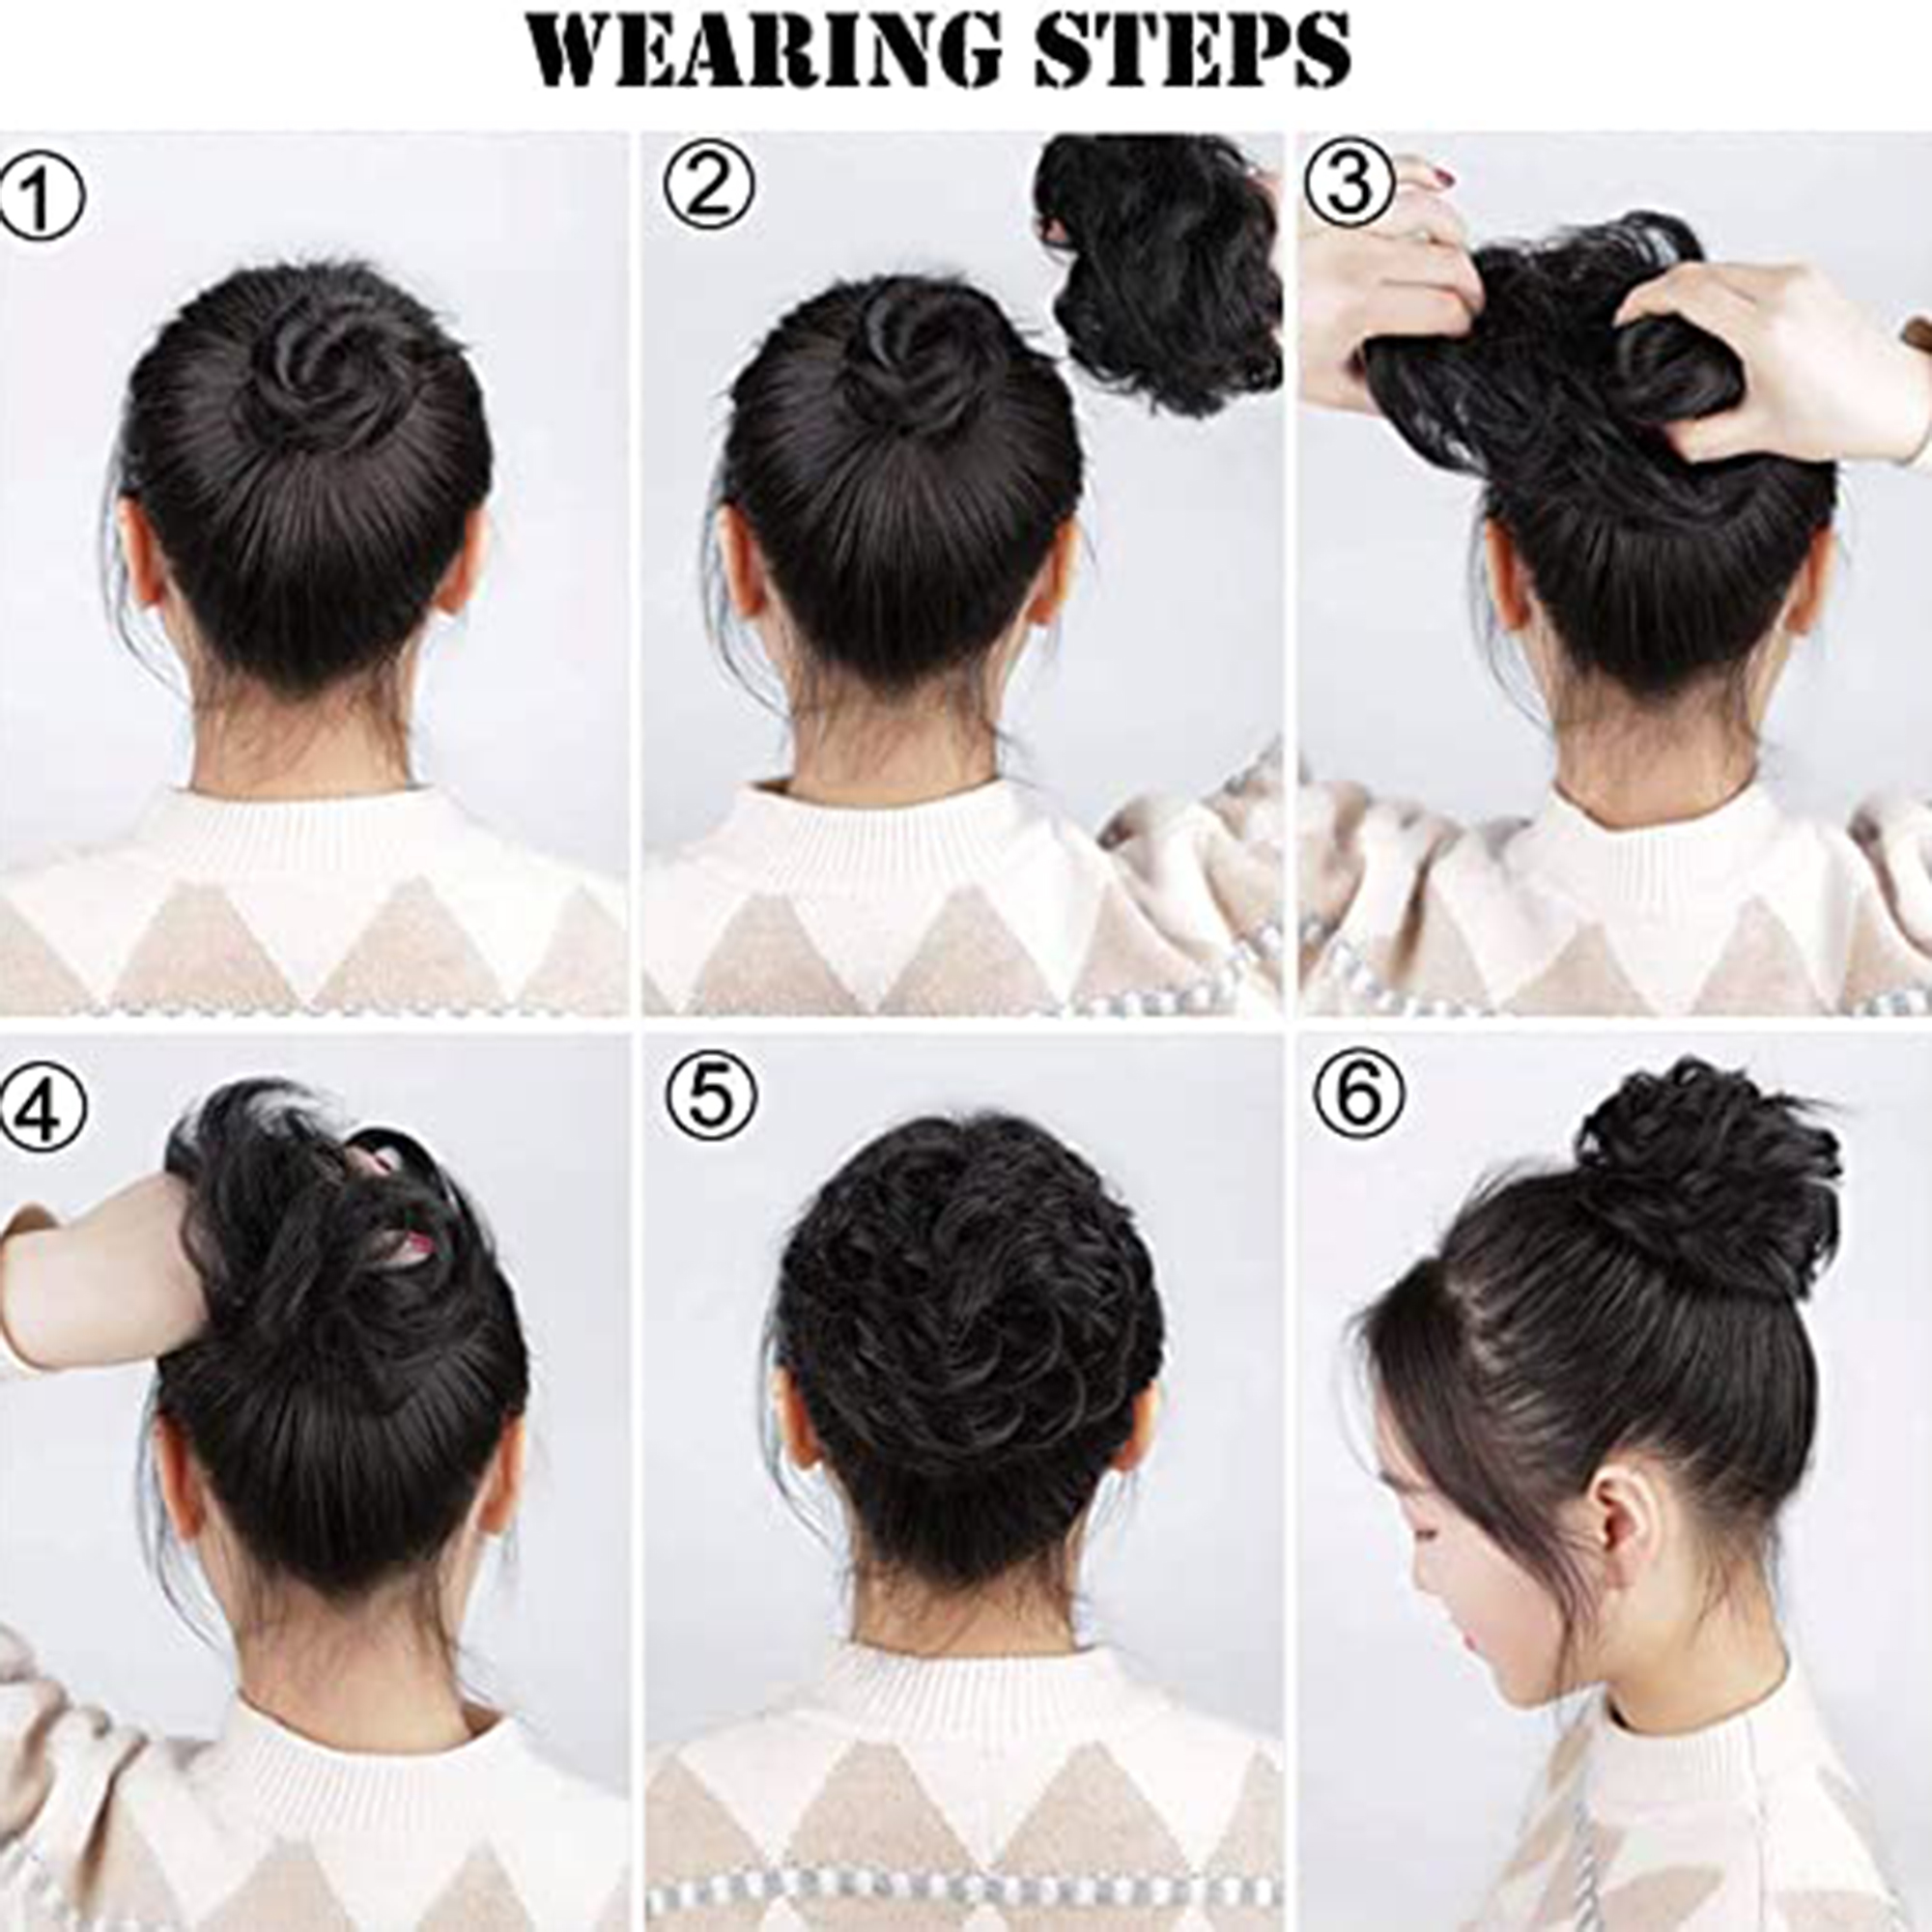 SAYFUT Curly Messy Hair Bun Extension Ponytail Hairpiece-Synthetic Chignon Hairpiece Wrap Messy Hair Bun Donut Hair Chignons Hair Piece for women ( 12 Colors,44g) - image 4 of 7